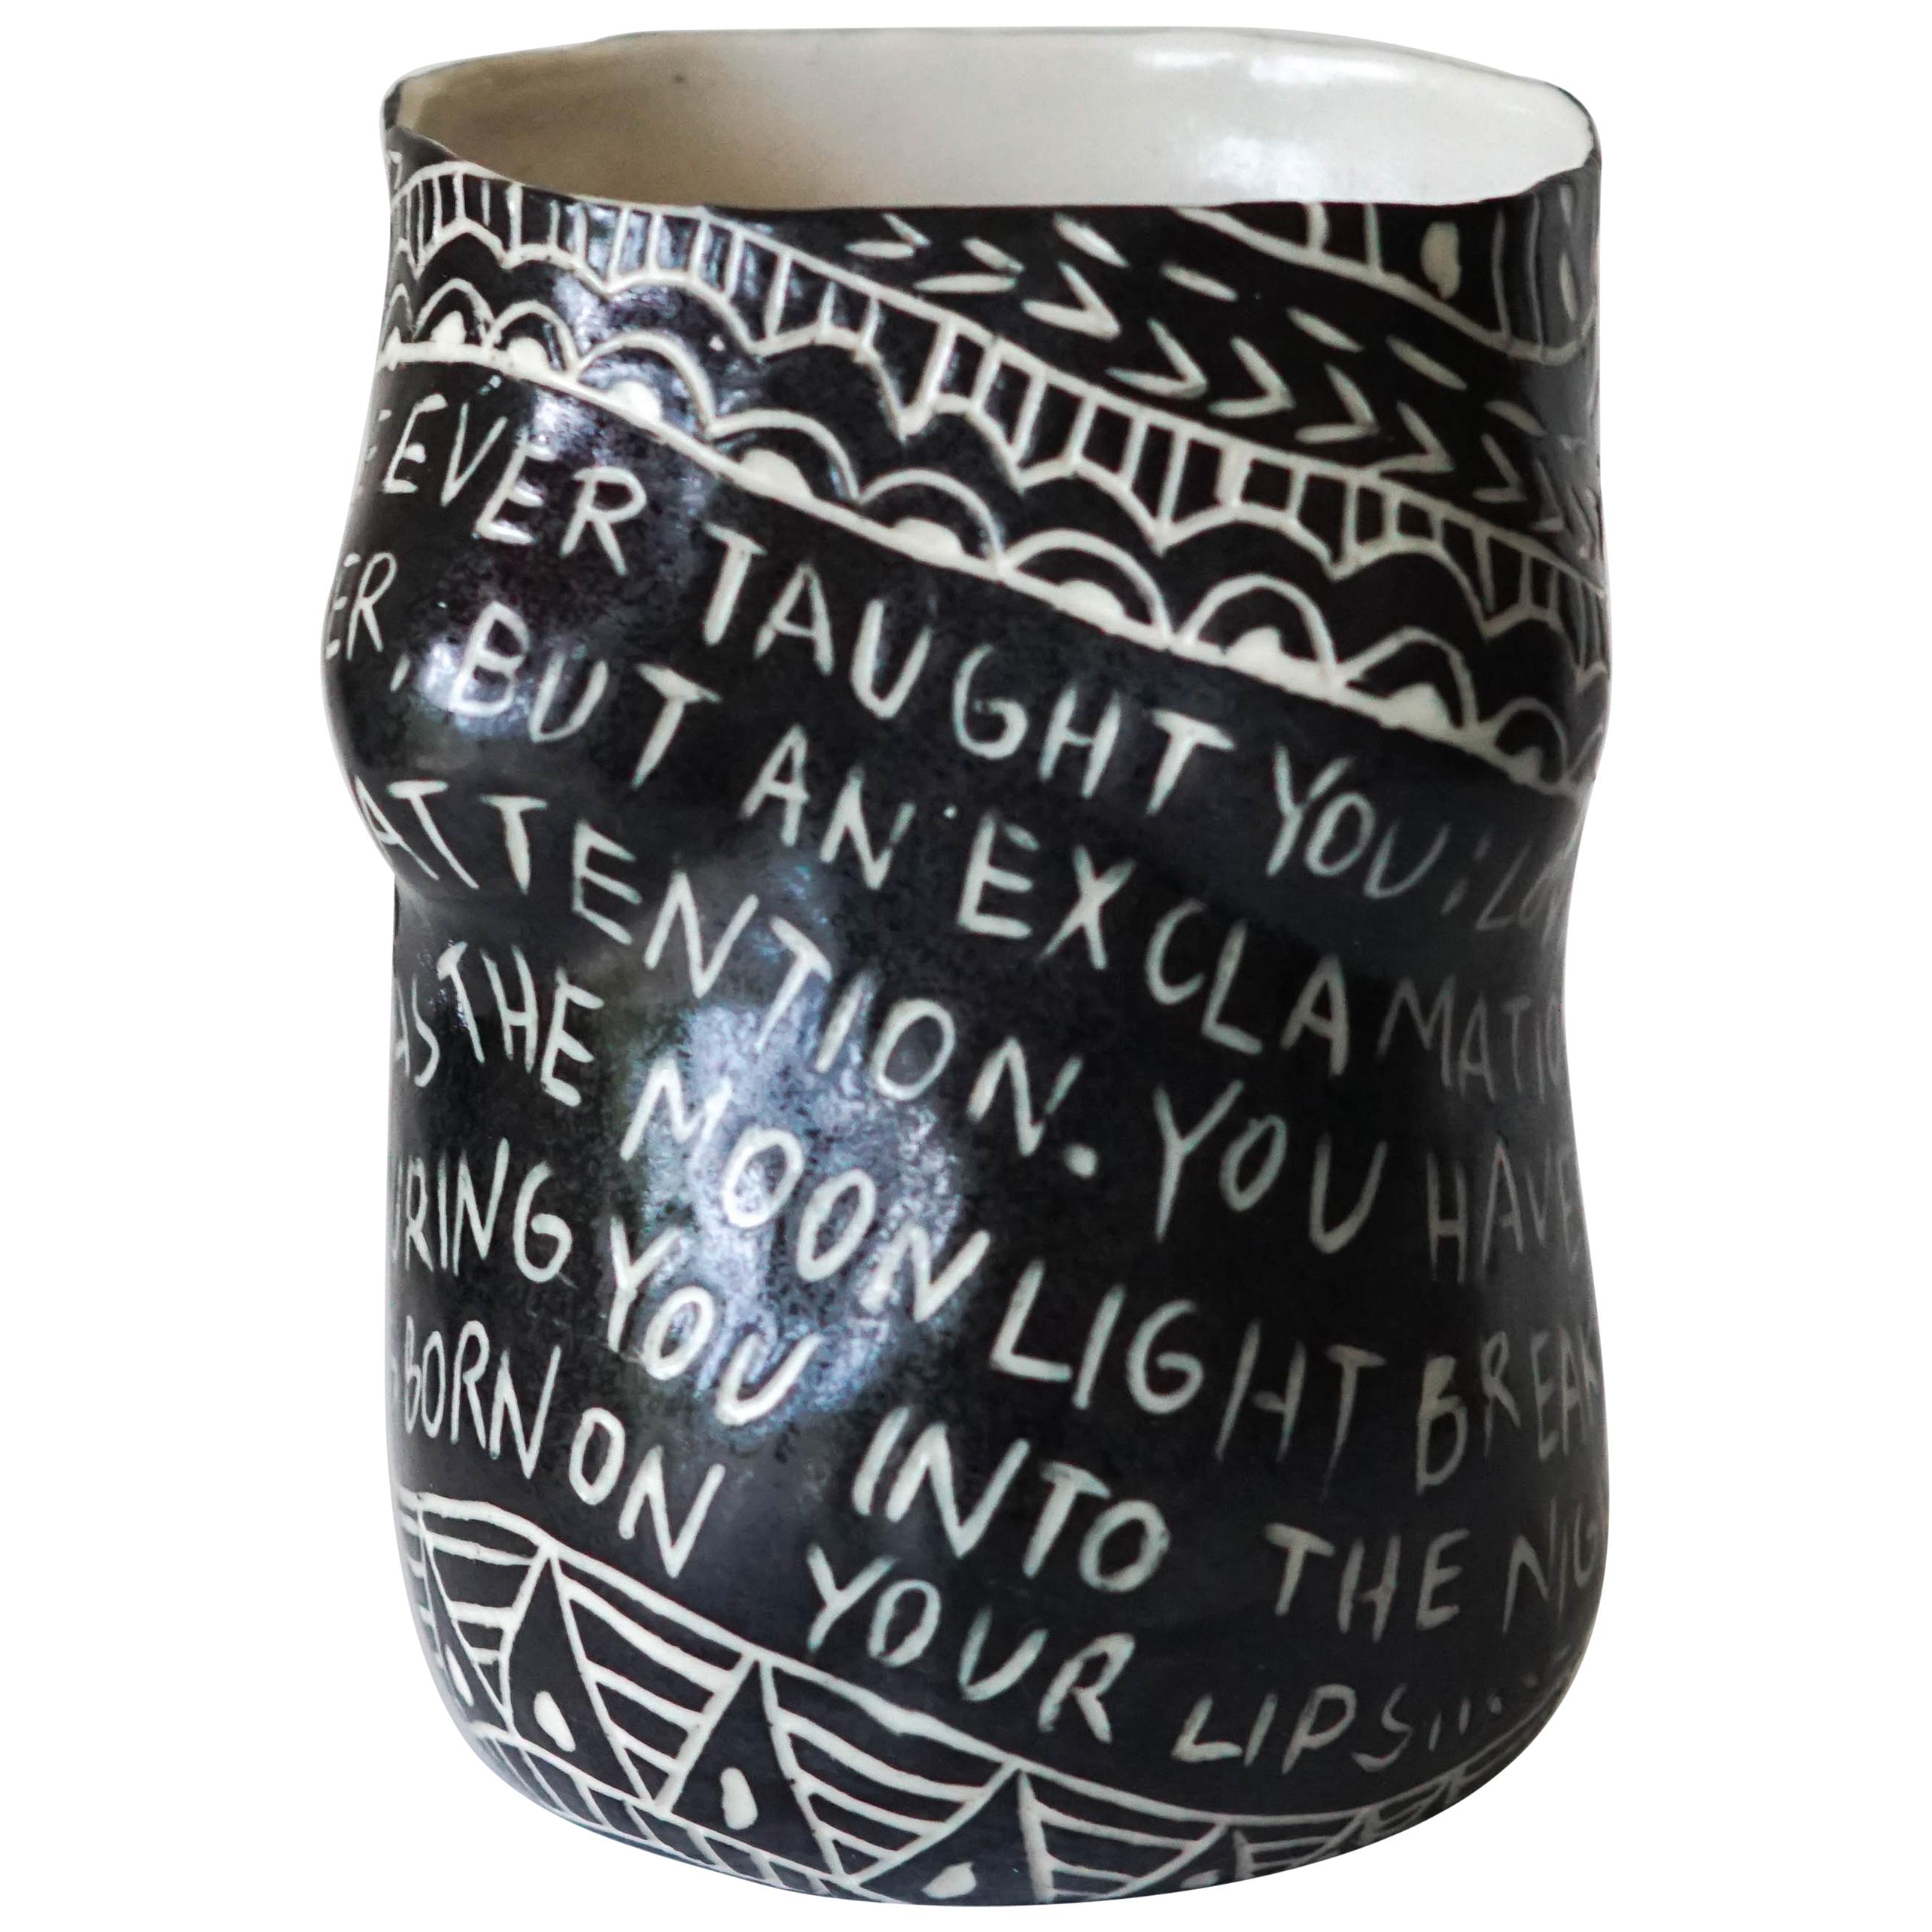 “No one ever taught you...” Porcelain Cup with Sgraffito Detailing